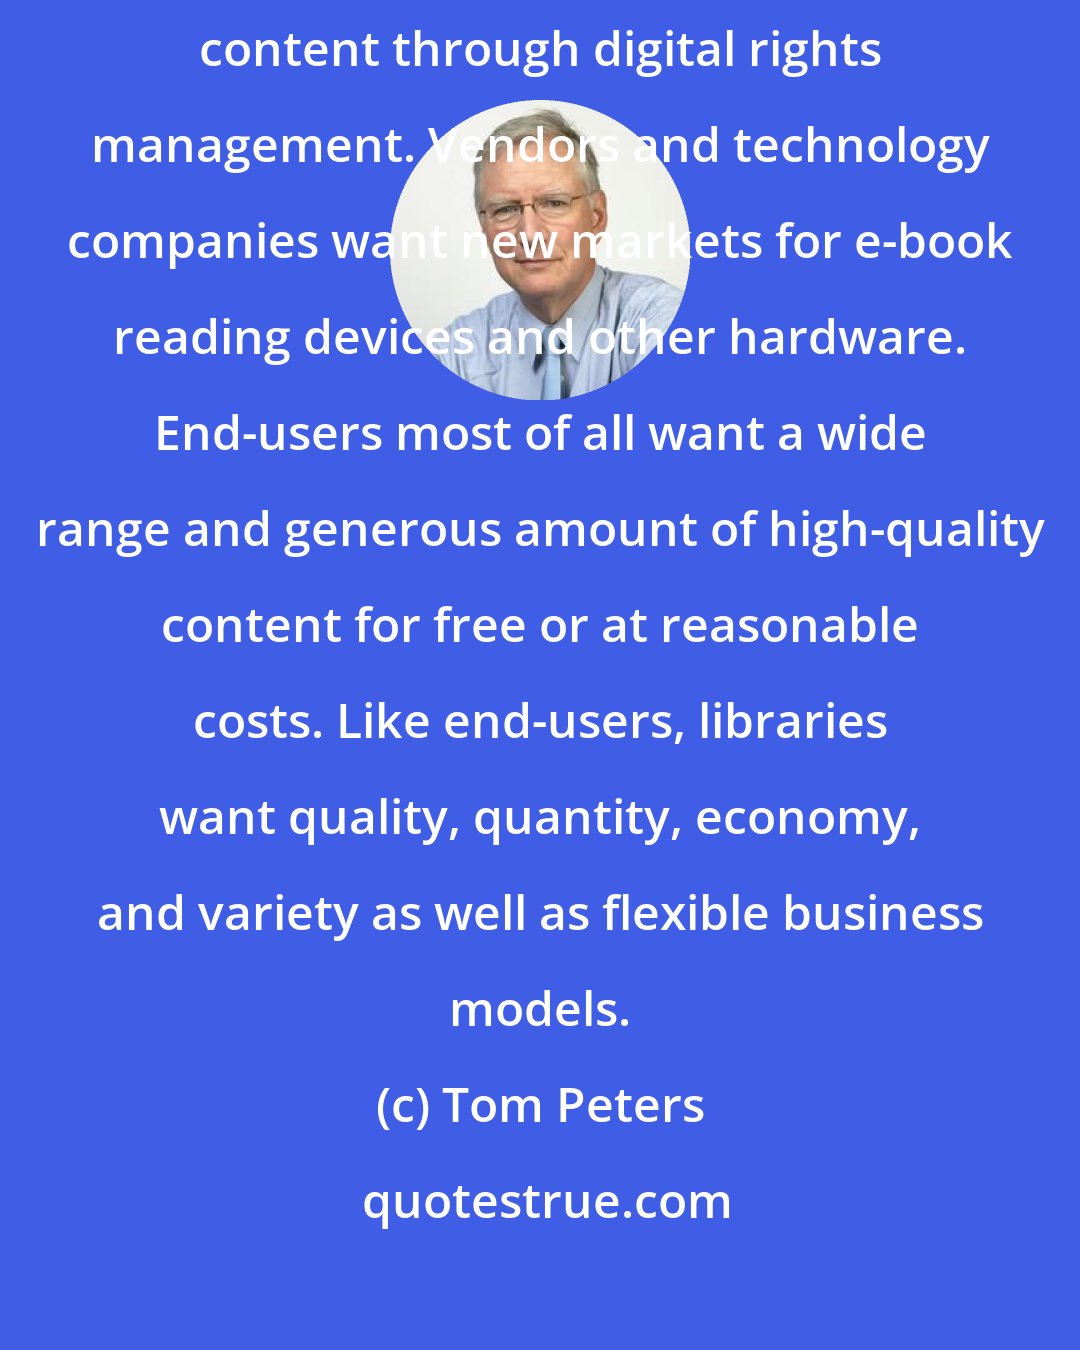 Tom Peters: Authors and publishers want fair compensation and a means of protecting content through digital rights management. Vendors and technology companies want new markets for e-book reading devices and other hardware. End-users most of all want a wide range and generous amount of high-quality content for free or at reasonable costs. Like end-users, libraries want quality, quantity, economy, and variety as well as flexible business models.